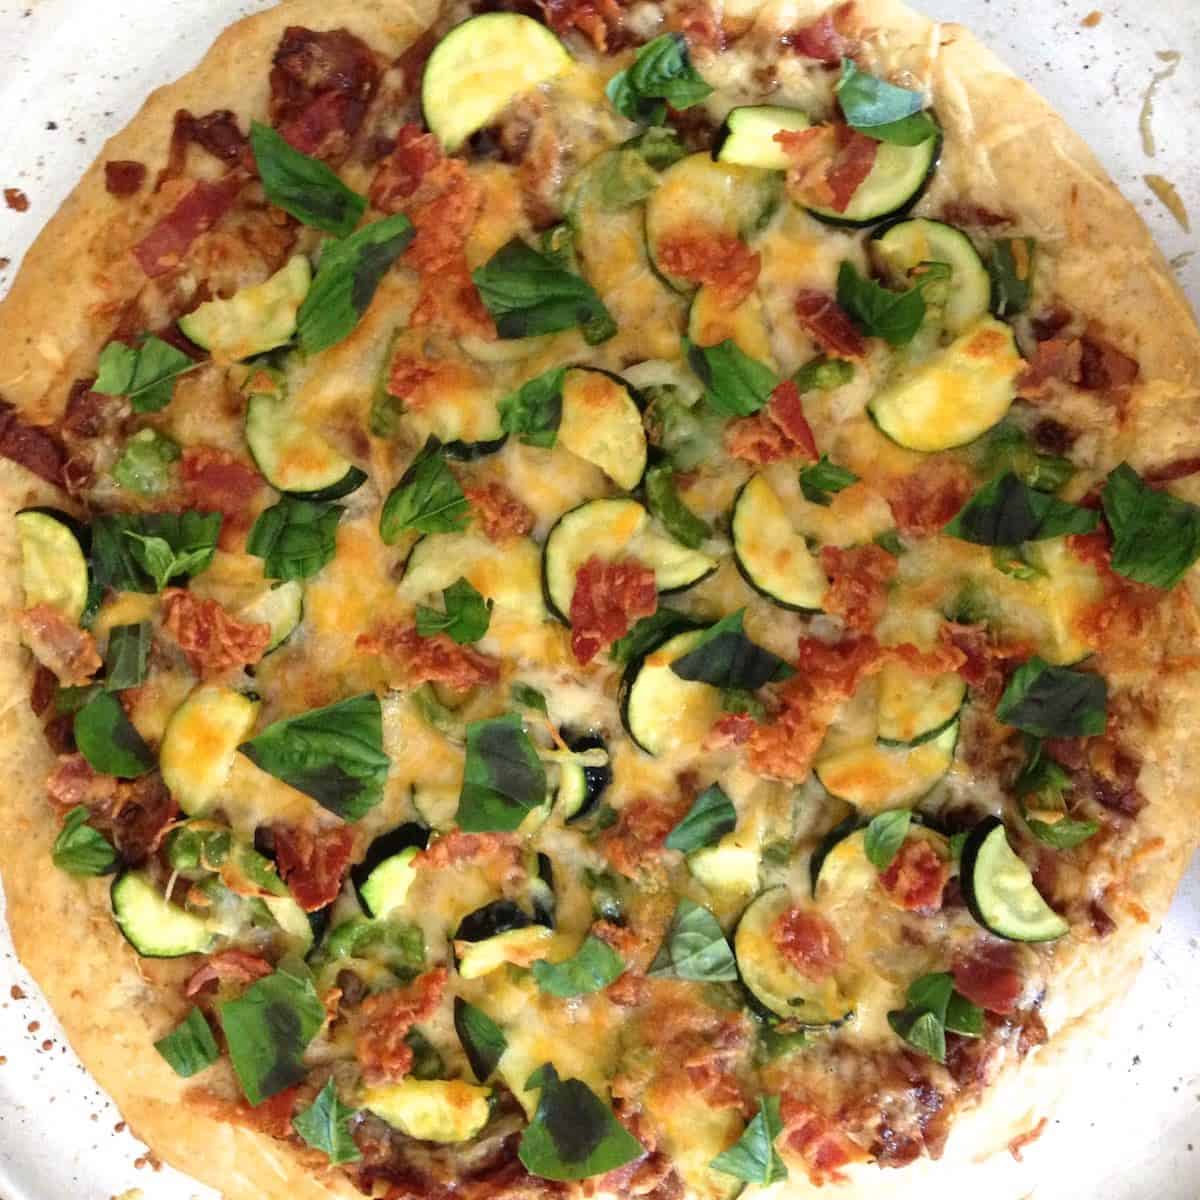 garden therapy benefits Vegetable pizza with caramelized BBQ onion sauce, bacon and basil